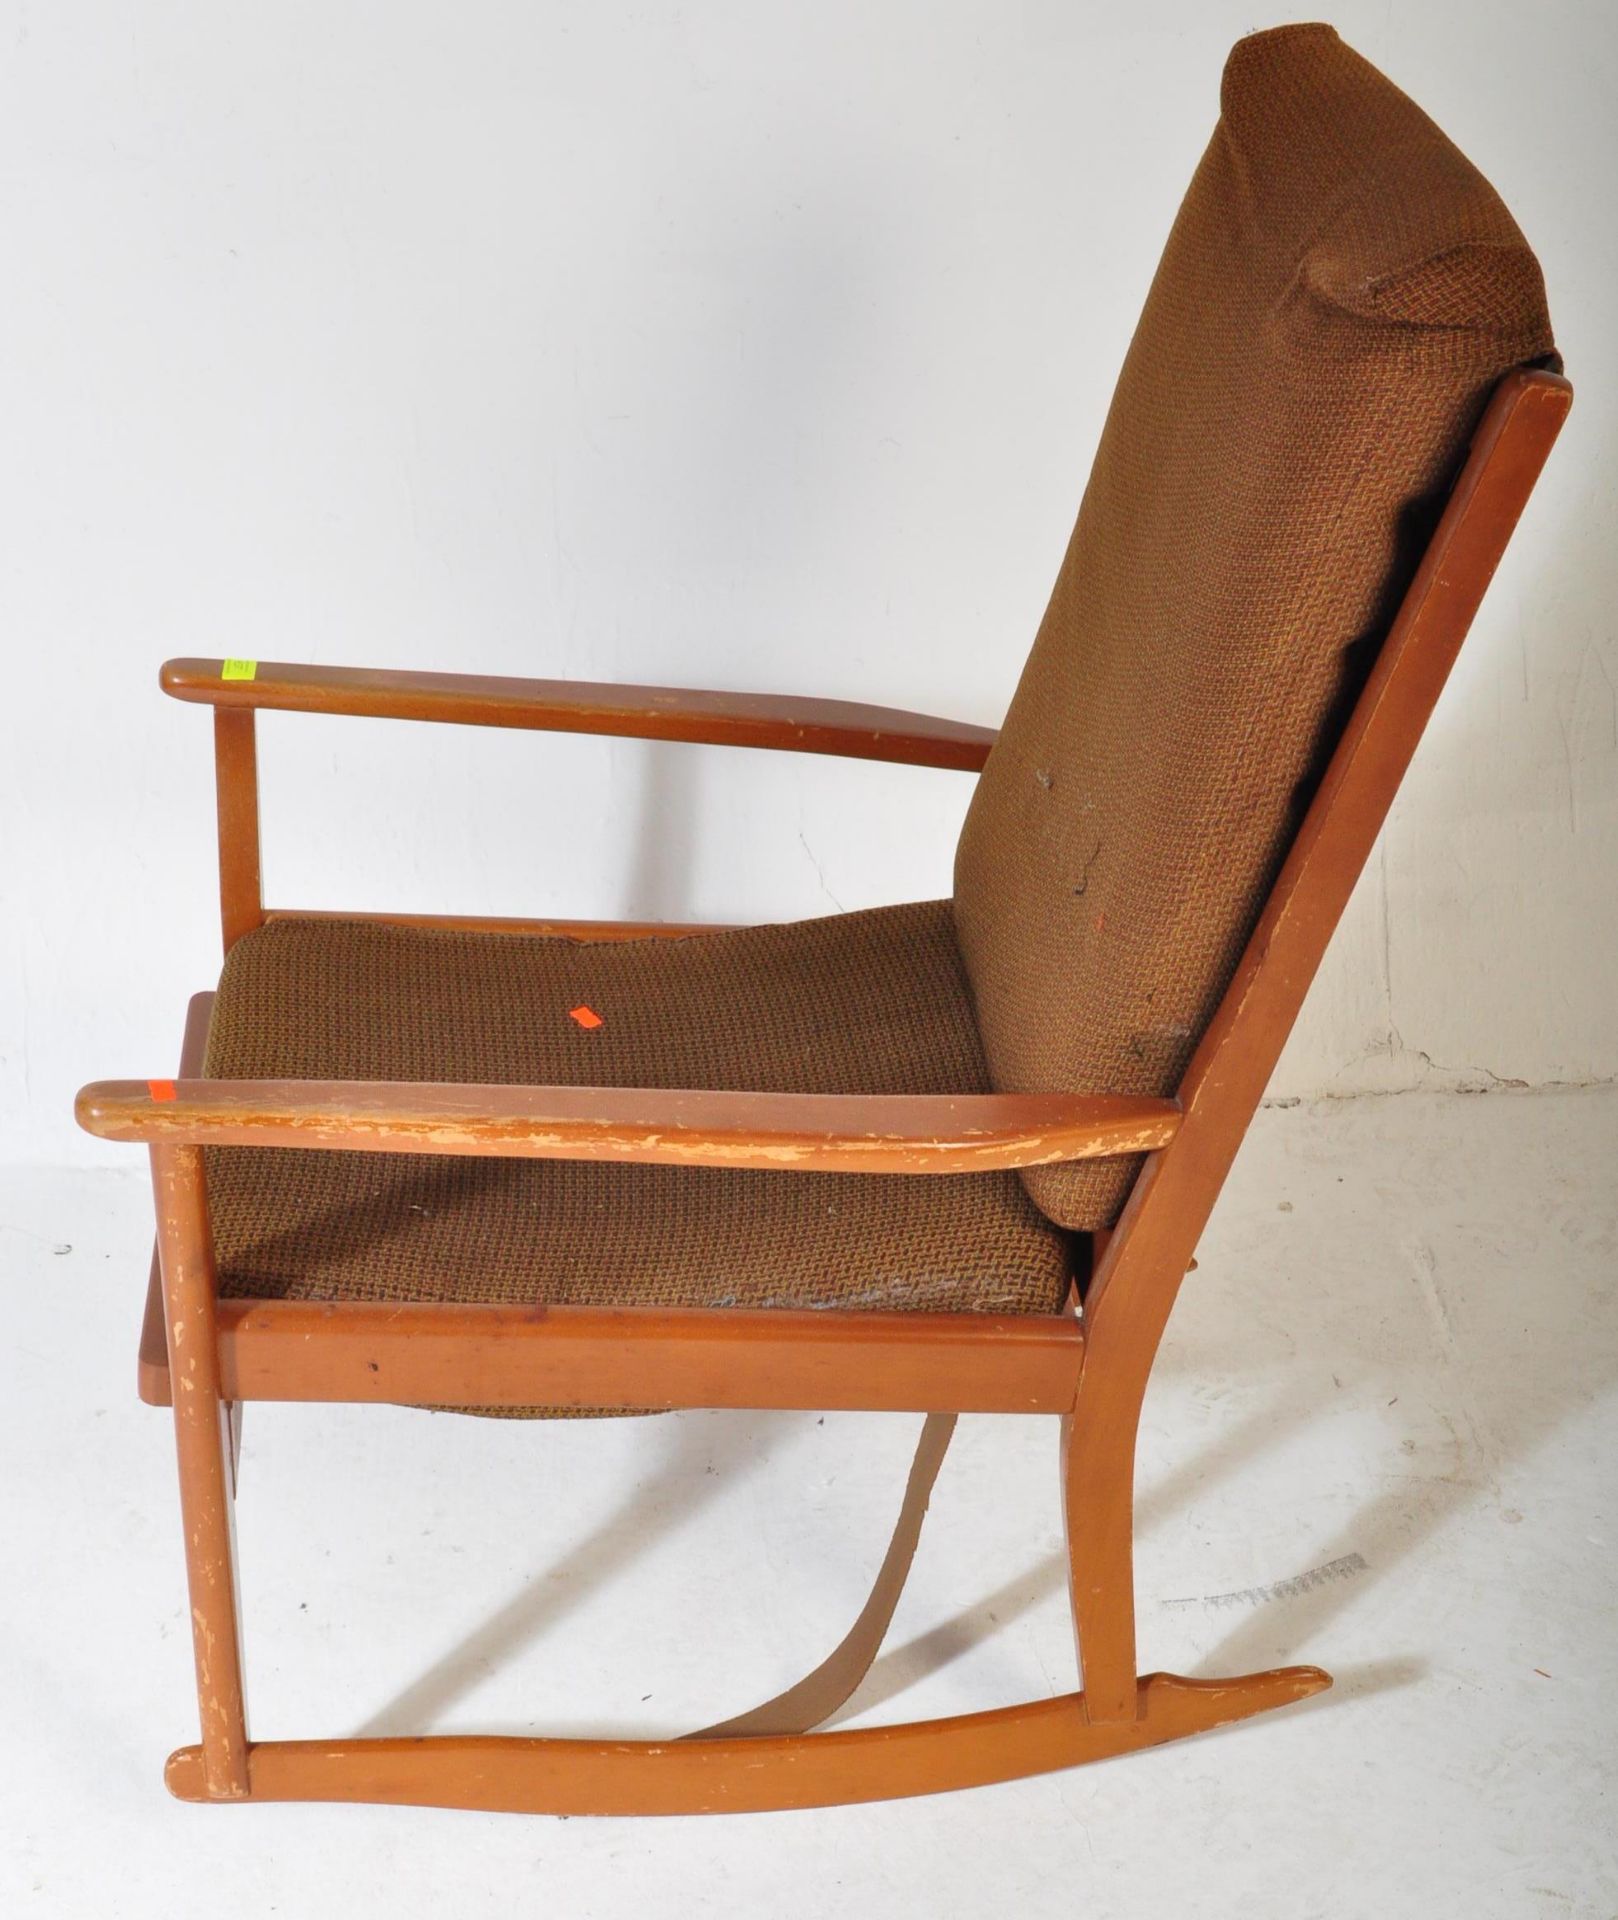 RETRO VINTAGE PARKER KNOLL STYLE ROCKING ARMCHAIR - Image 3 of 5